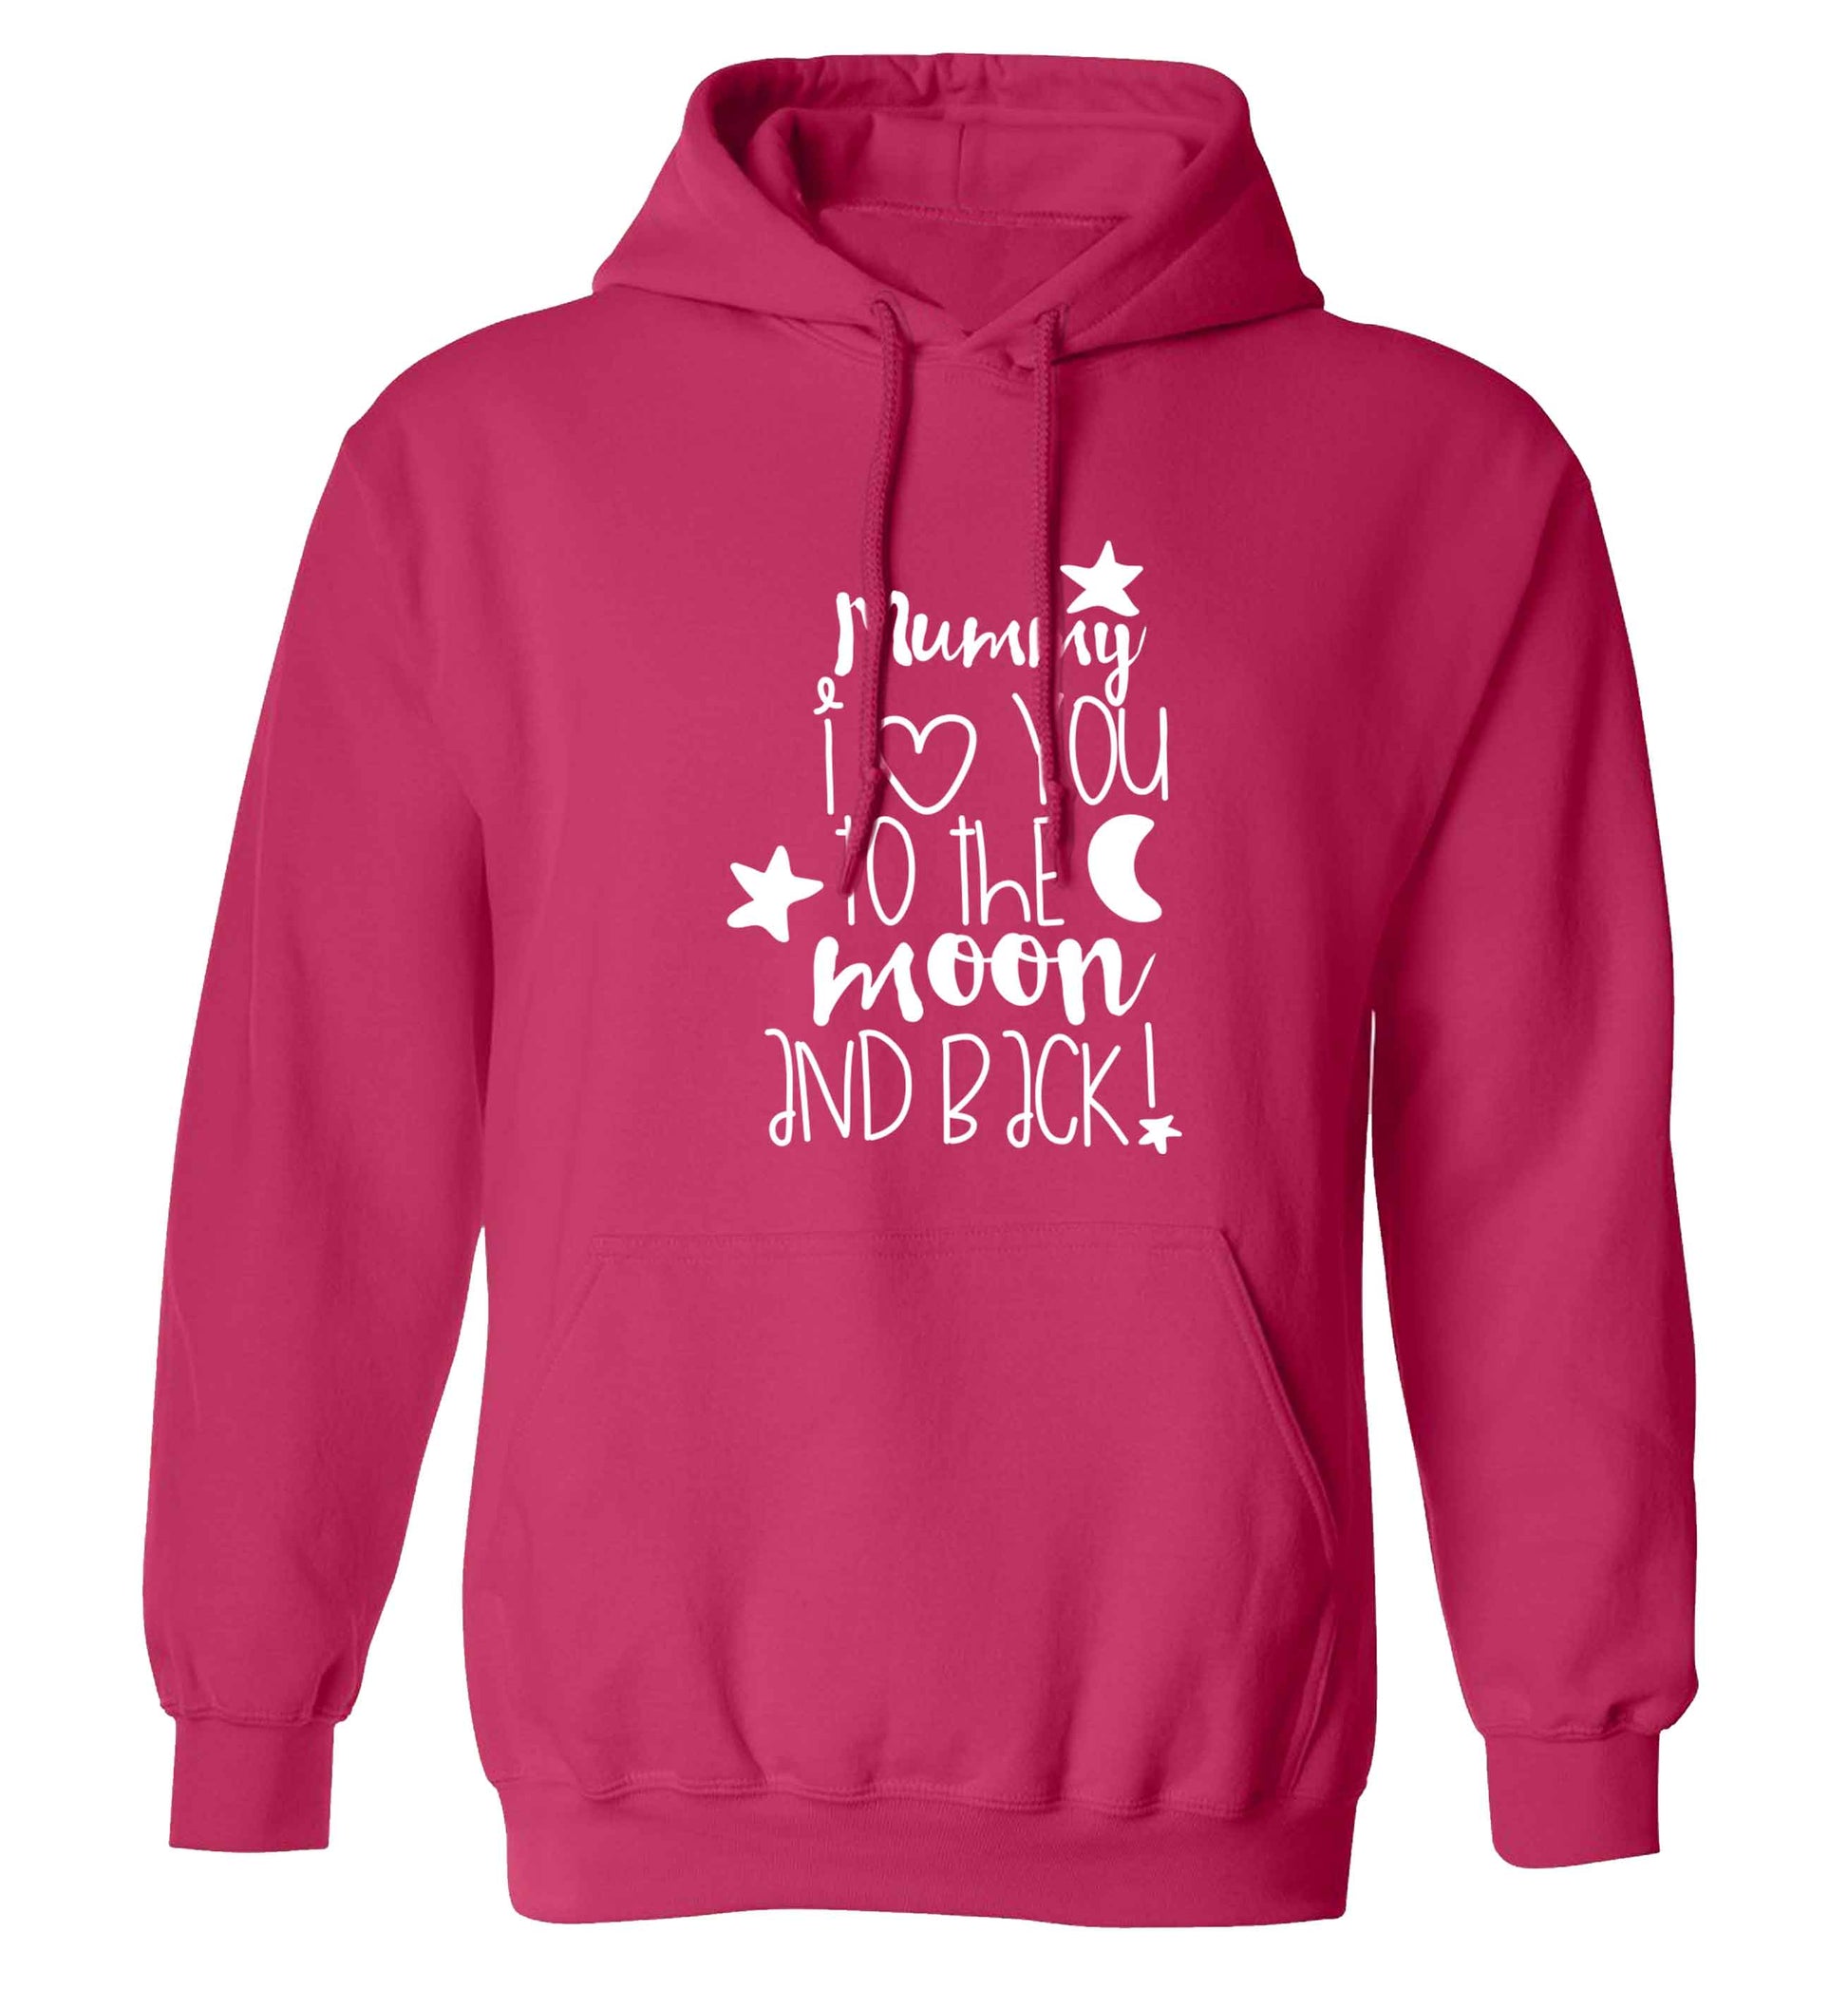 Mummy I love you to the moon and back adults unisex pink hoodie 2XL